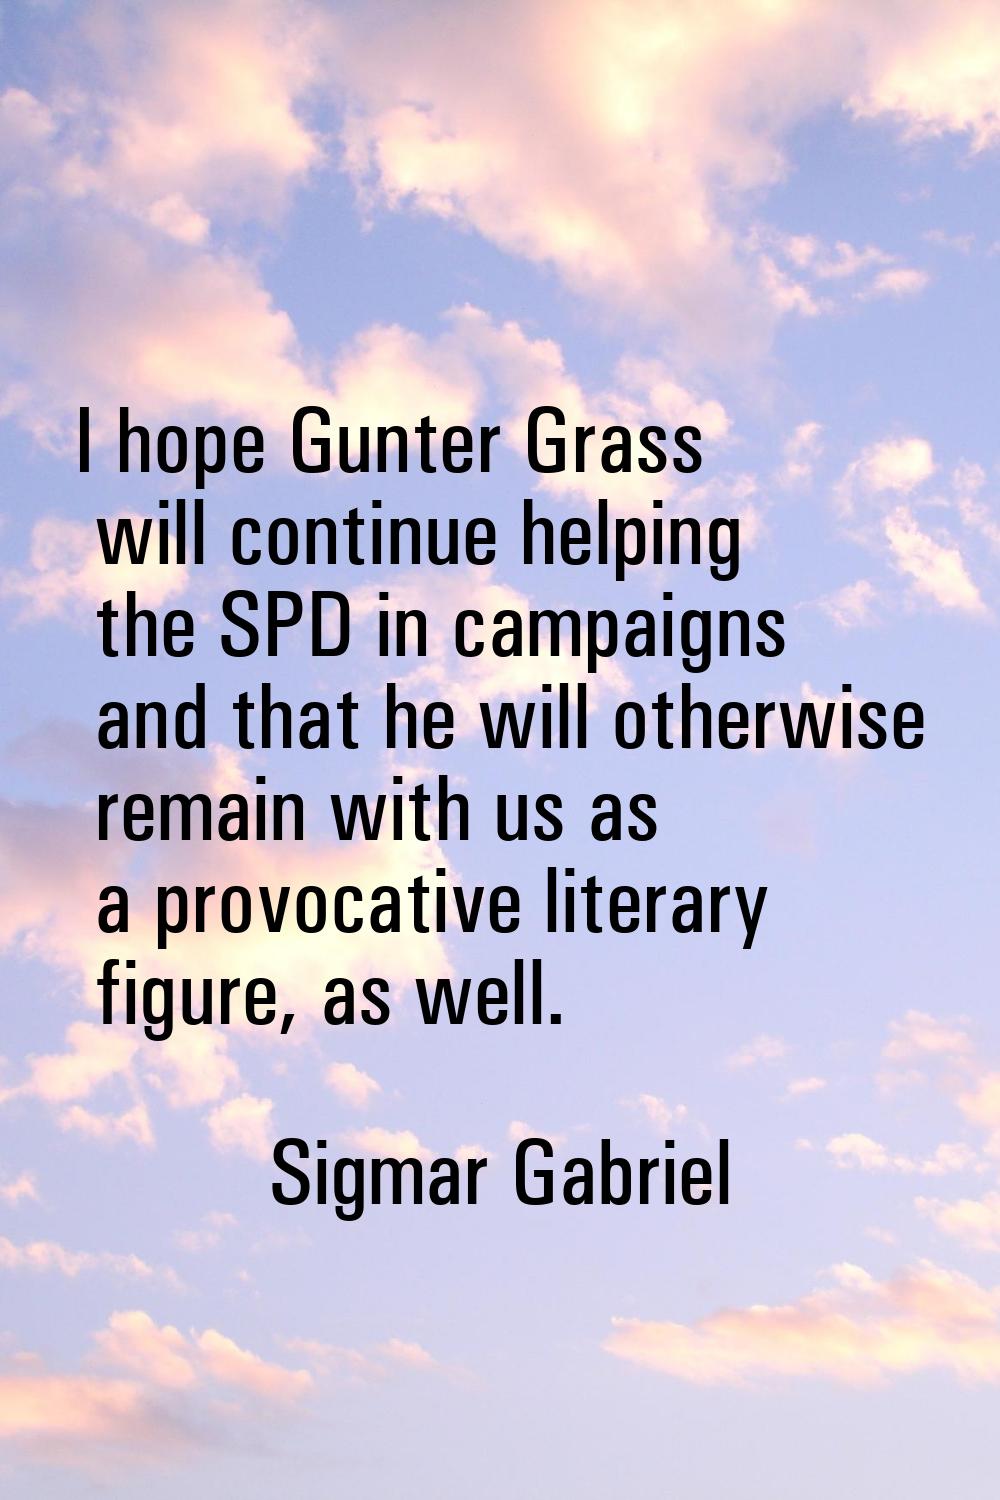 I hope Gunter Grass will continue helping the SPD in campaigns and that he will otherwise remain wi